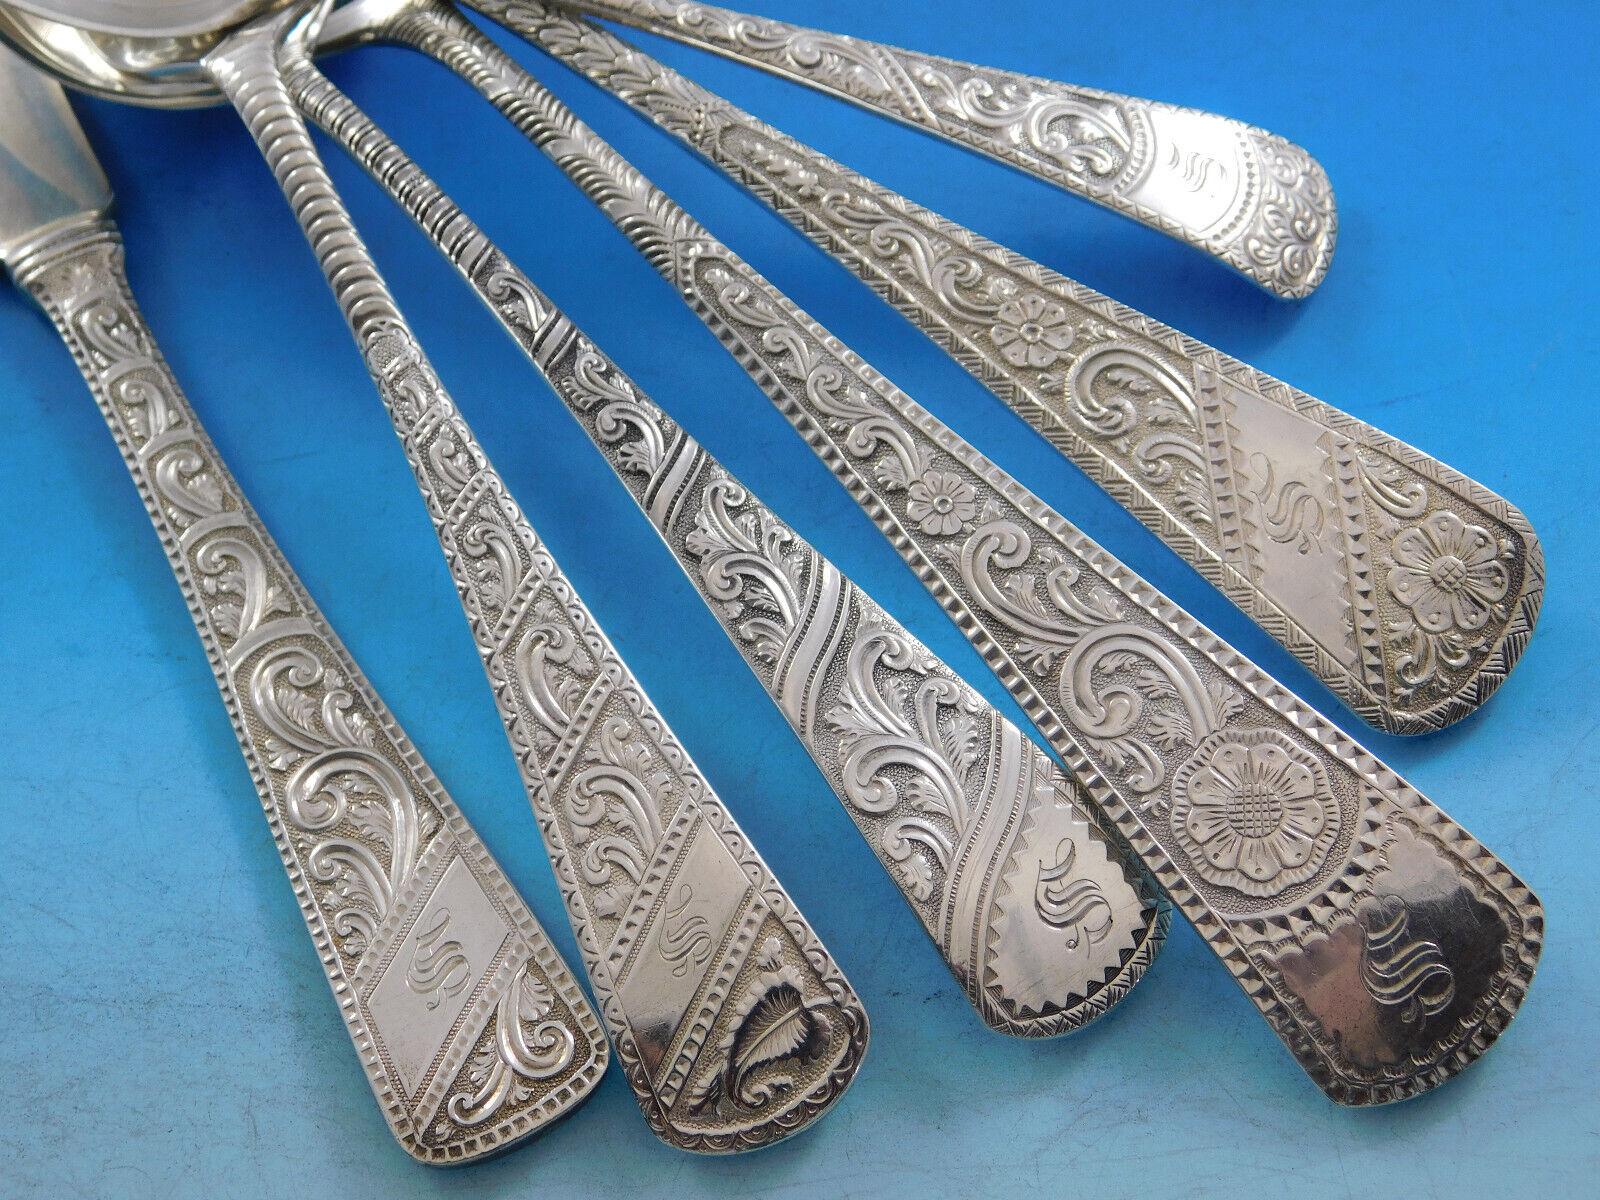 Exceedingly rare Tudor by Gorham c1880 sterling silver flatware set - 72 Pieces. This multi-motif pattern is beautifully hand engraved with varying floral and rococo designs. This set includes:
12 Knives, flat handle all-sterling, 8 1/4